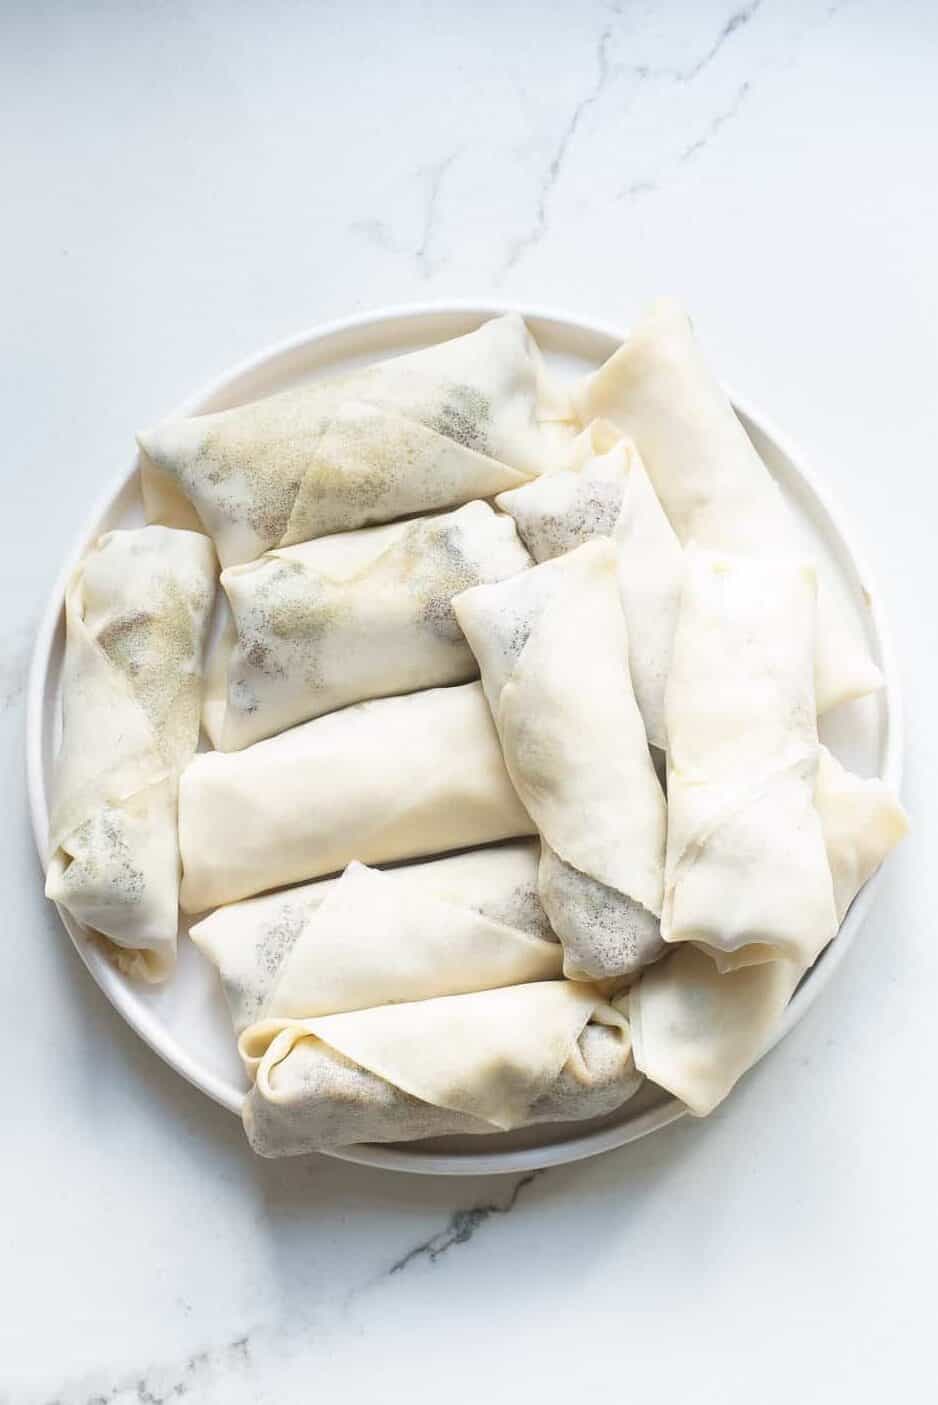 plate of wrapped and uncooked philly cheesesteak egg rolls